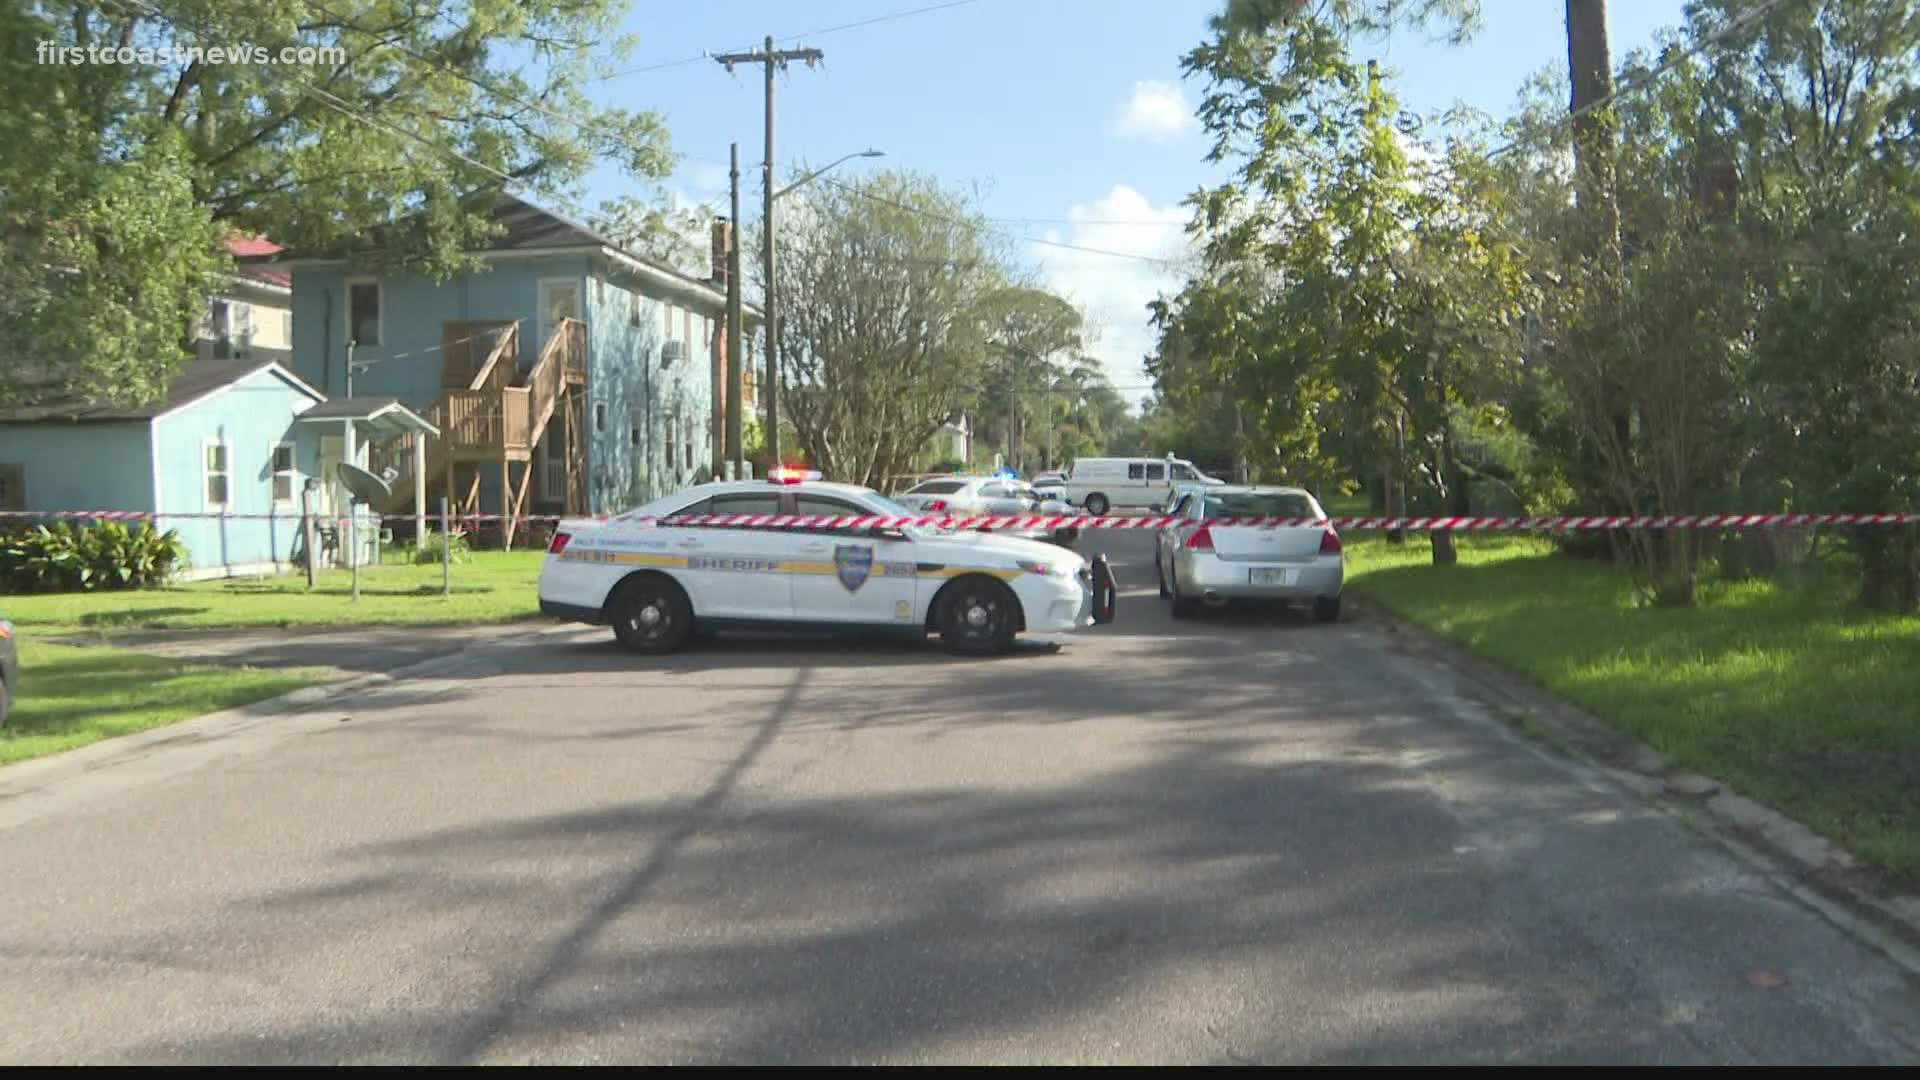 The shooting happened in the area of Willow Branch and Forbes Street, according to JSO.